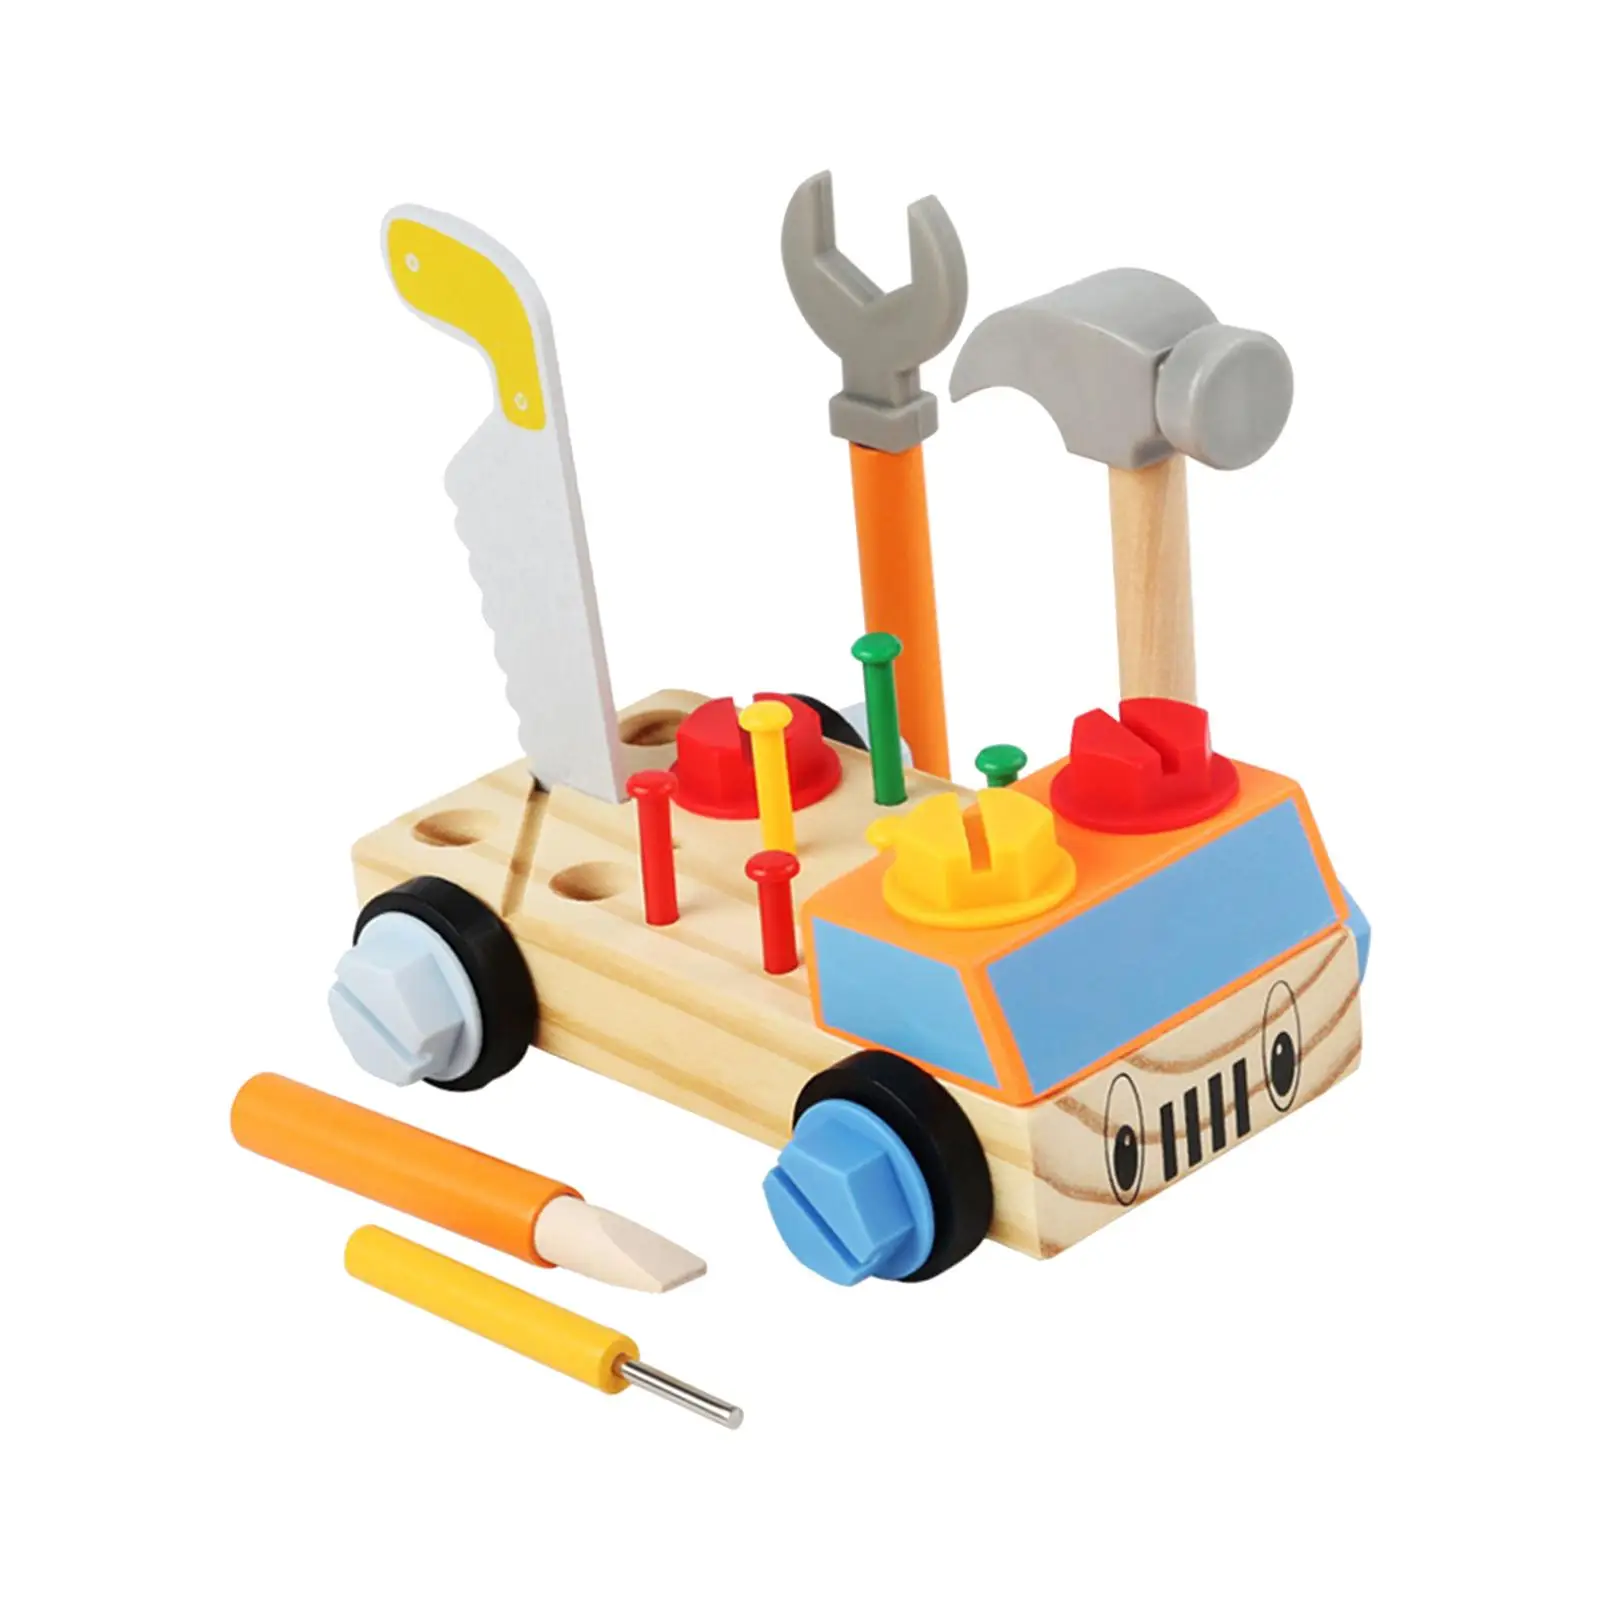 Wooden Play Tool Set Children`s Construction Tool Workbench for Preschool Ages